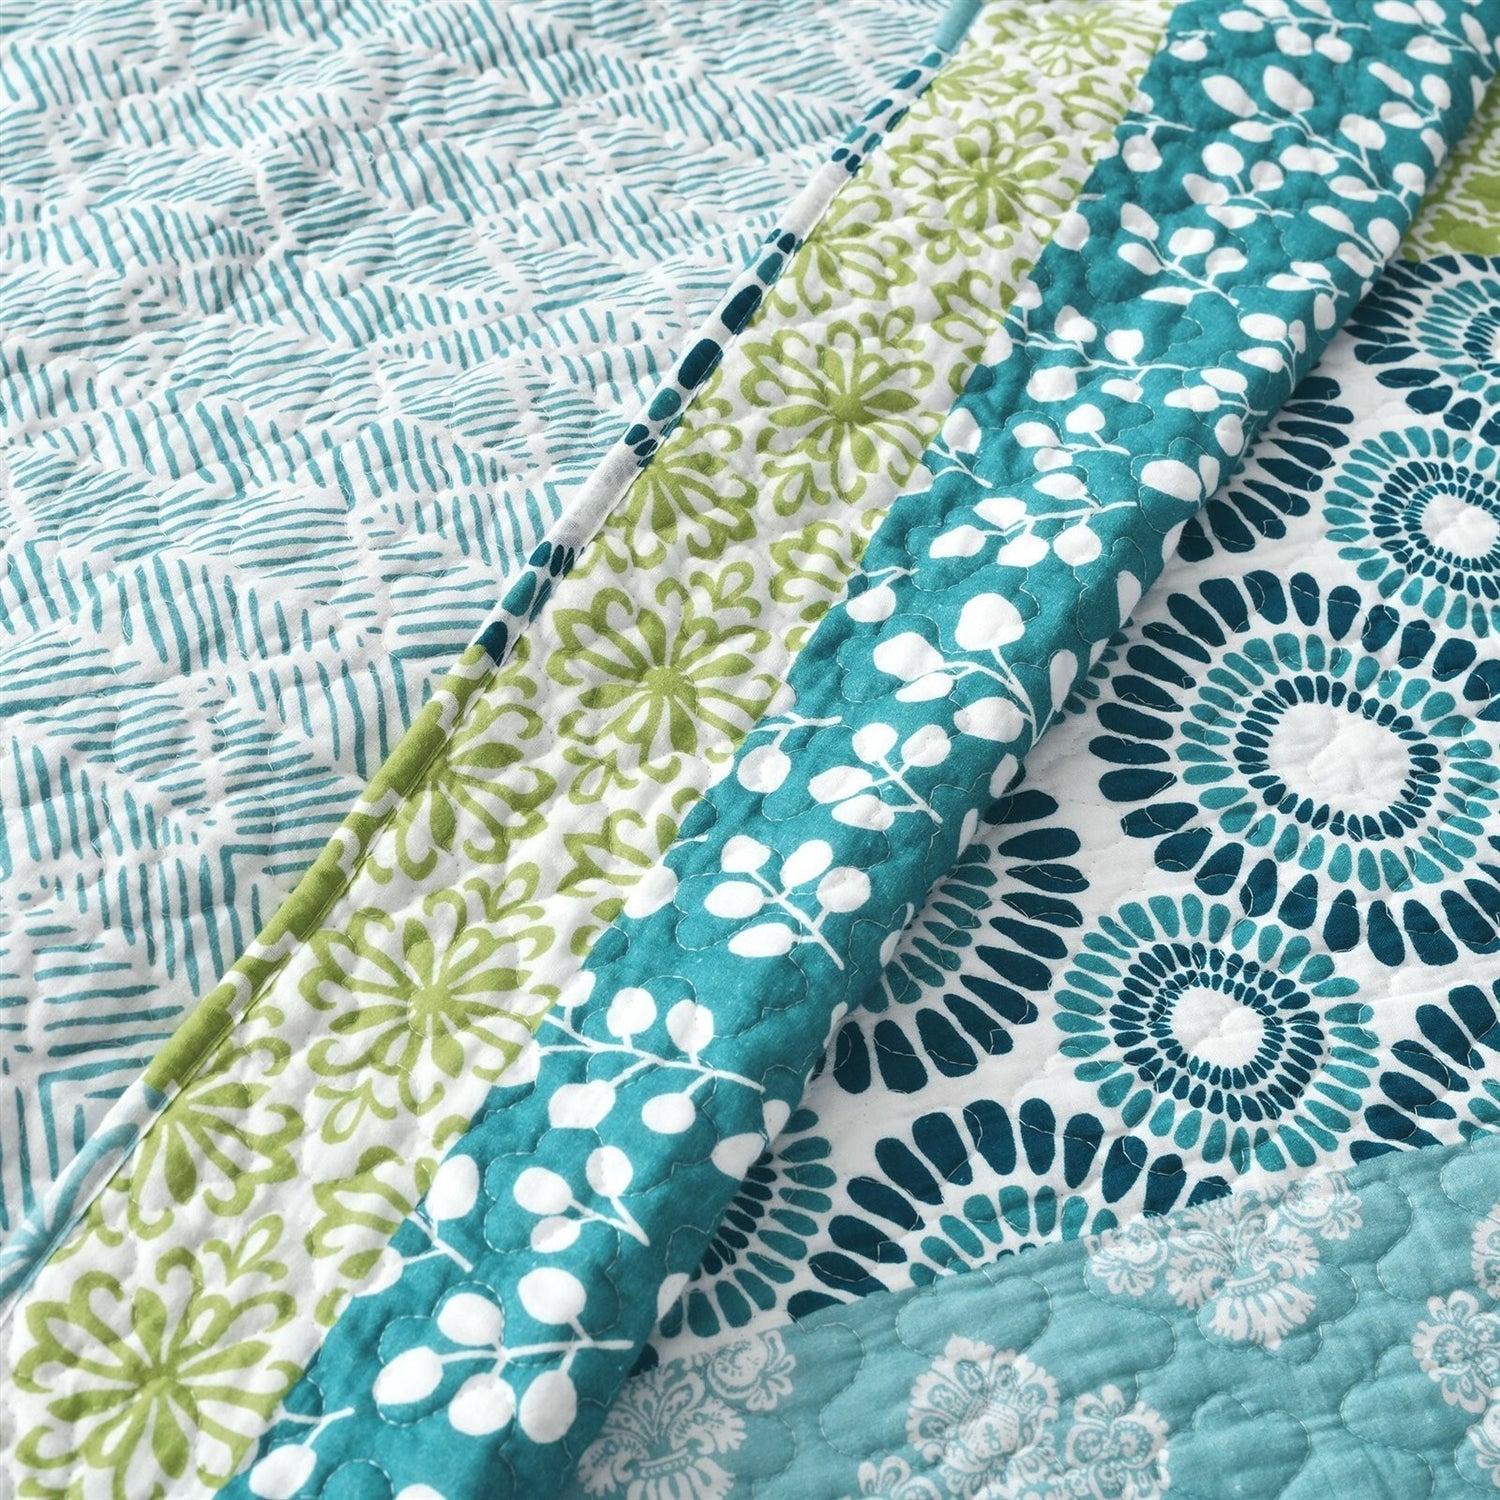 Bedroom > Quilts & Blankets - King Size Cotton 3 Piece Reversible Blue White Green Floral Damask Quilt Set